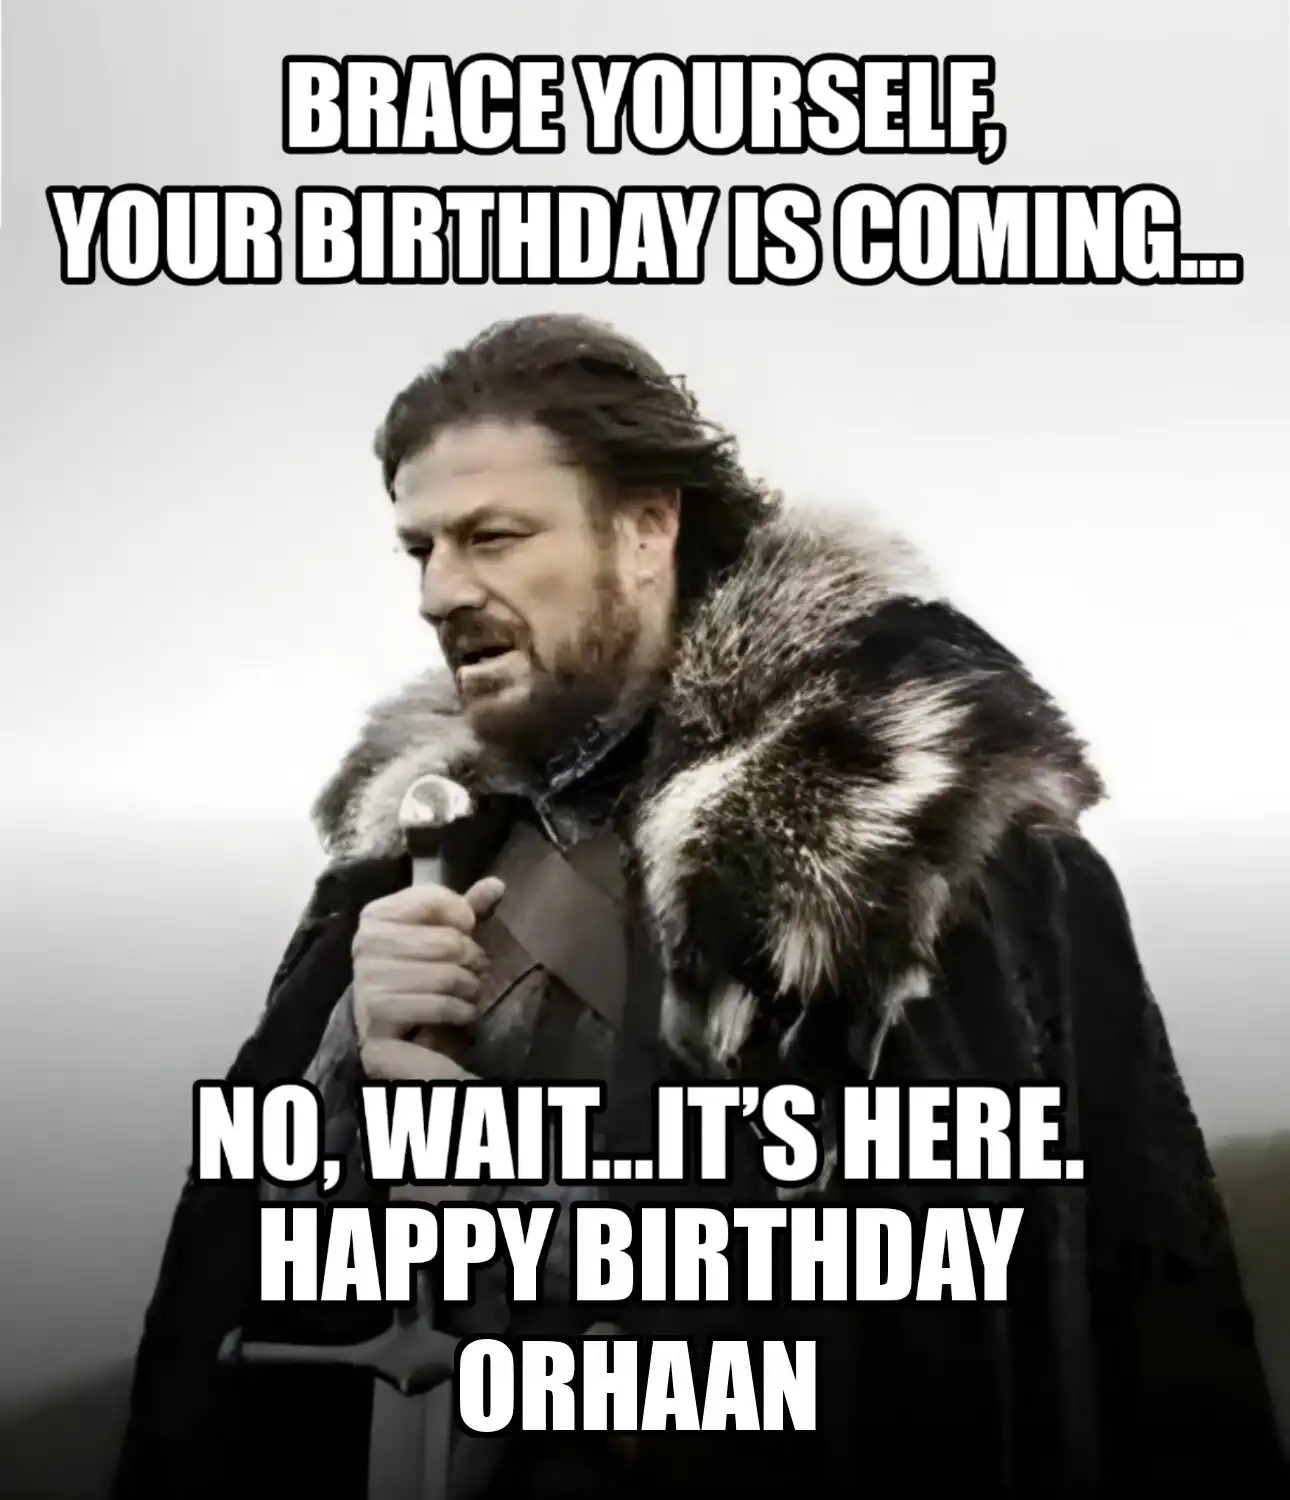 Happy Birthday Orhaan Brace Yourself Your Birthday Is Coming Meme